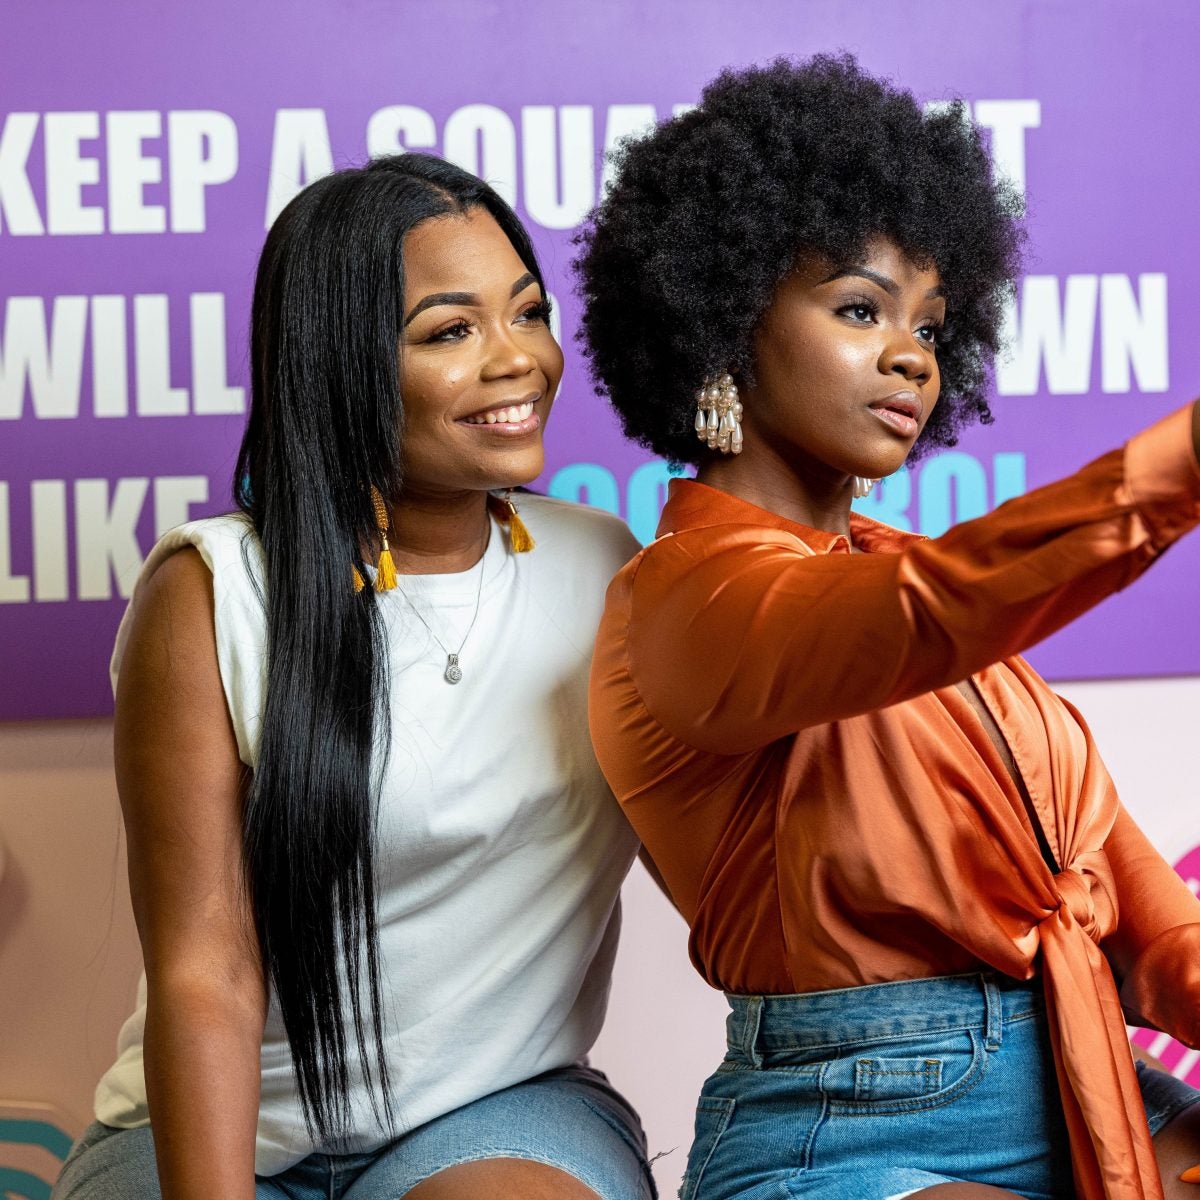 The Renowned 'Black Hair Experience' Is Expanding From Atlanta To The DMV